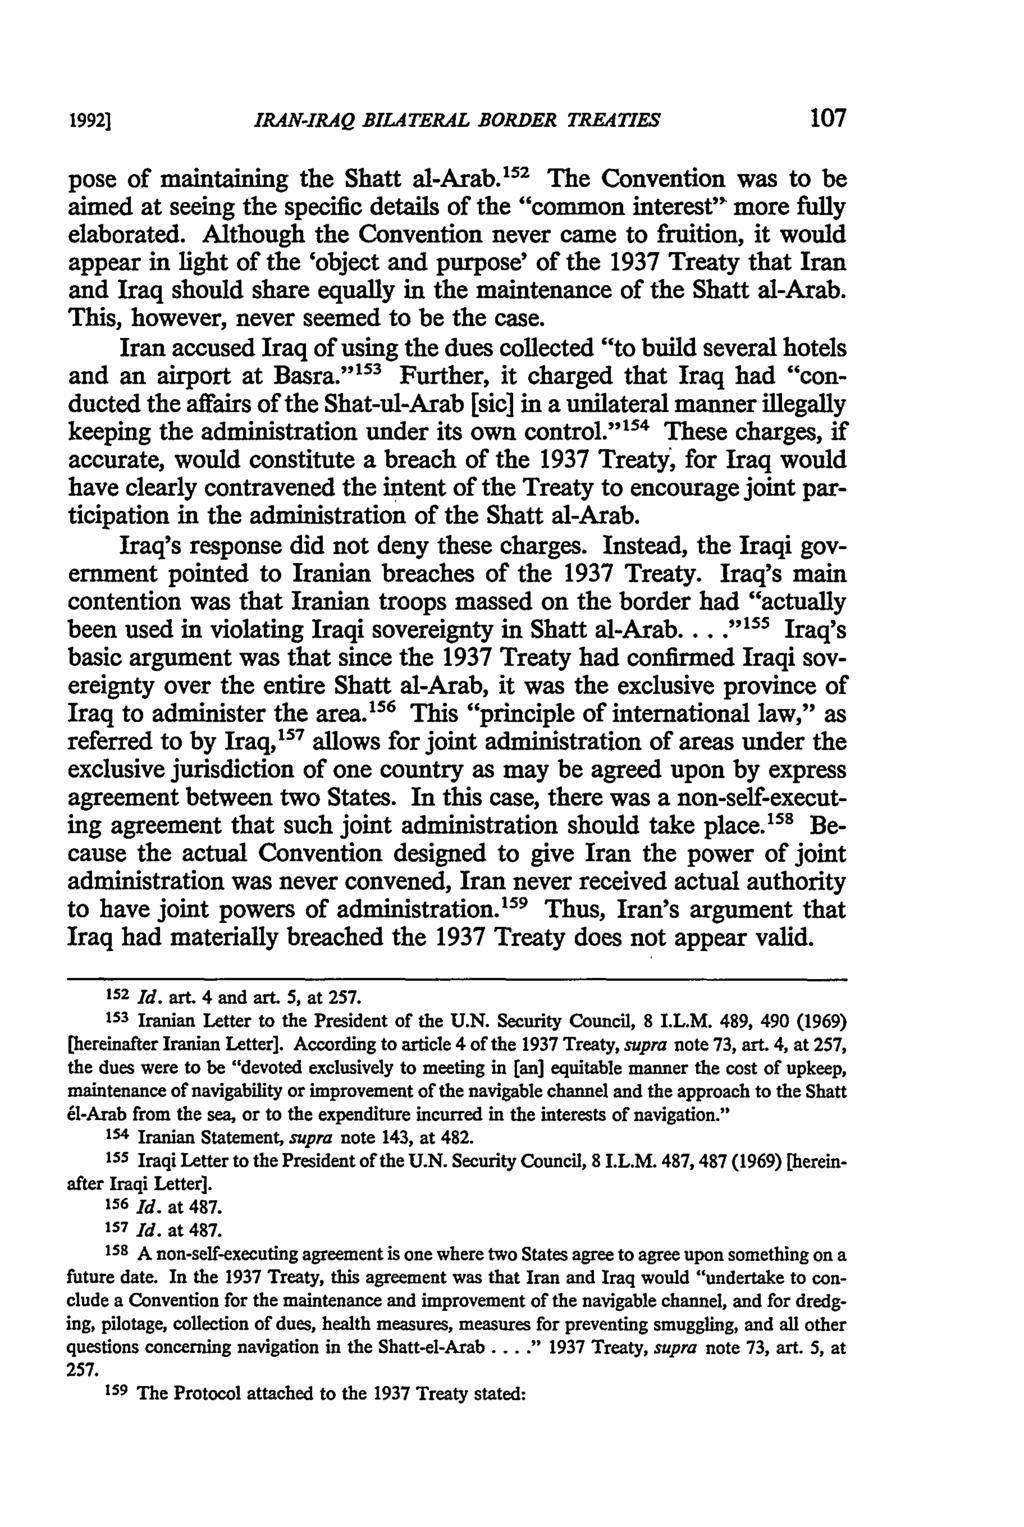 19921 IRAN-IRAQ BILATERAL BORDER TREATIES pose of maintaining the Shatt al-arab. 15 2 The Convention was to be aimed at seeing the specific details of the "common interest" more fully elaborated.